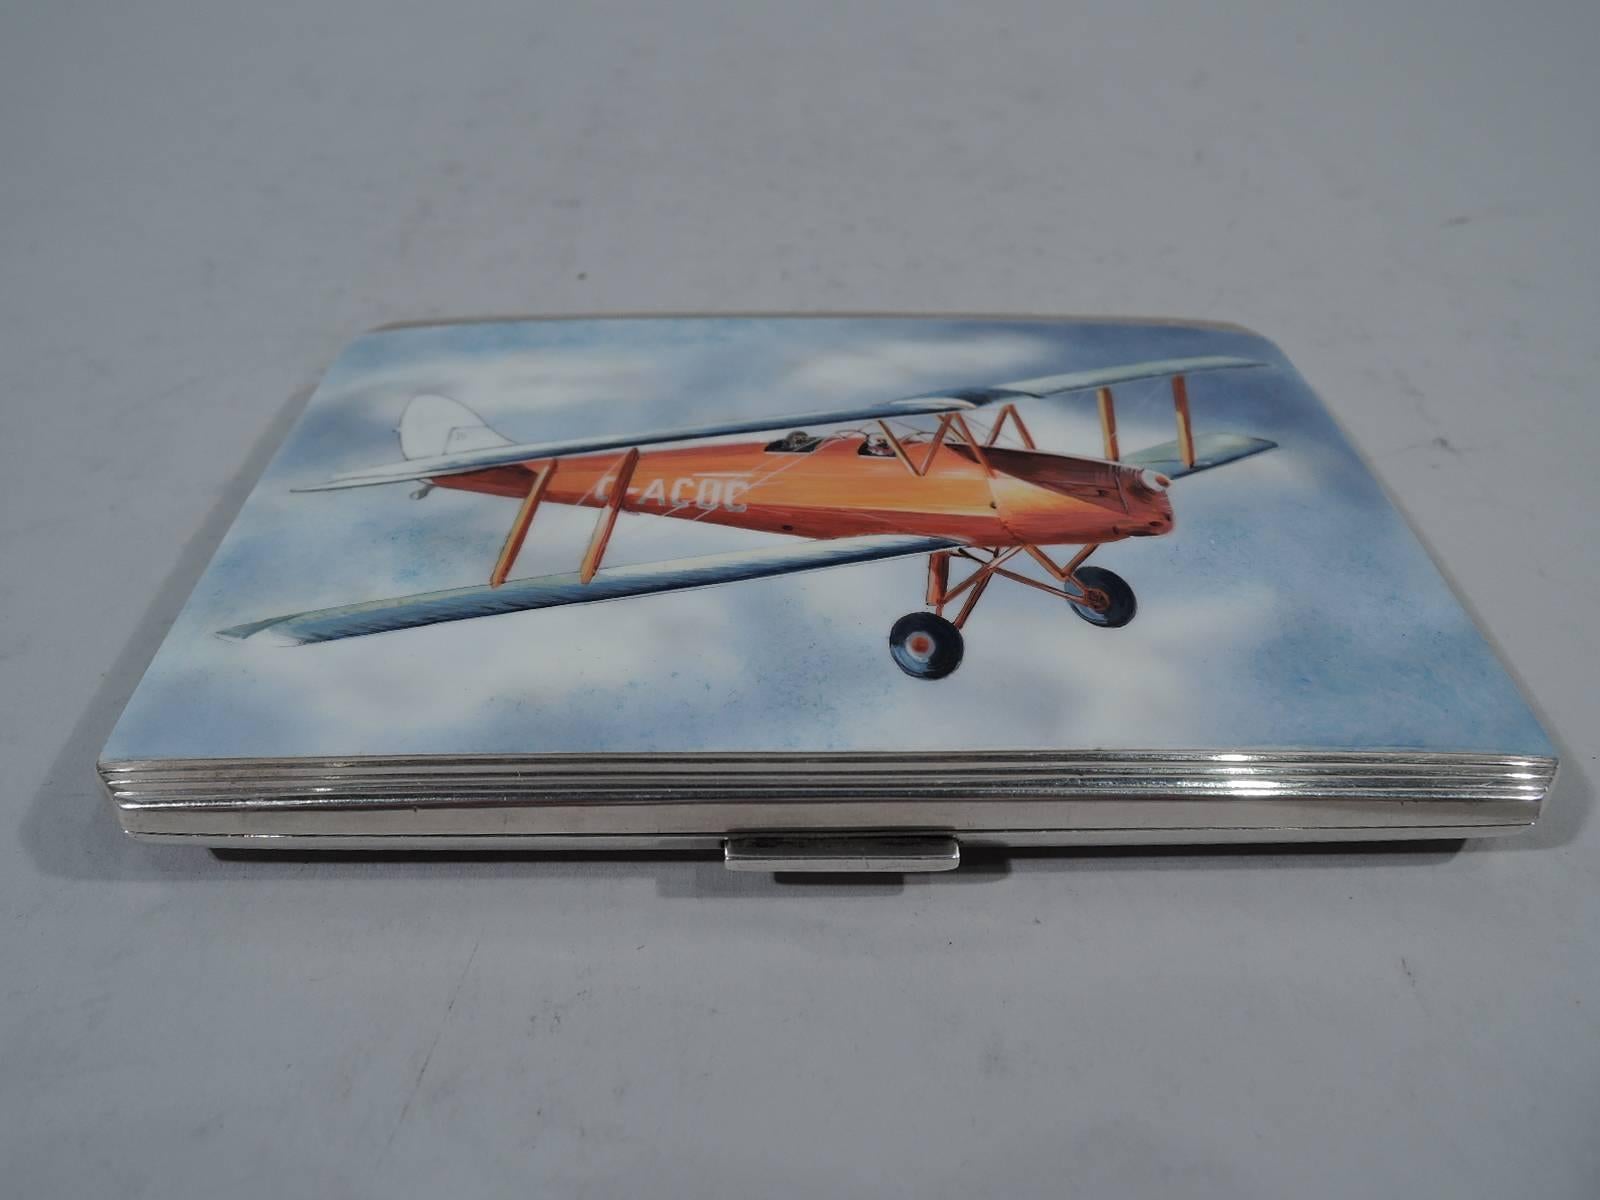 Elizabeth II sterling silver and enamel cigarette case. Made by Willian Neale & Sons, Ltd in Birmingham in 1956. Rectangular and hinged with chamfered corners. On cover in enamel is an early two-seat airplane piloted through blue sky and fluffy